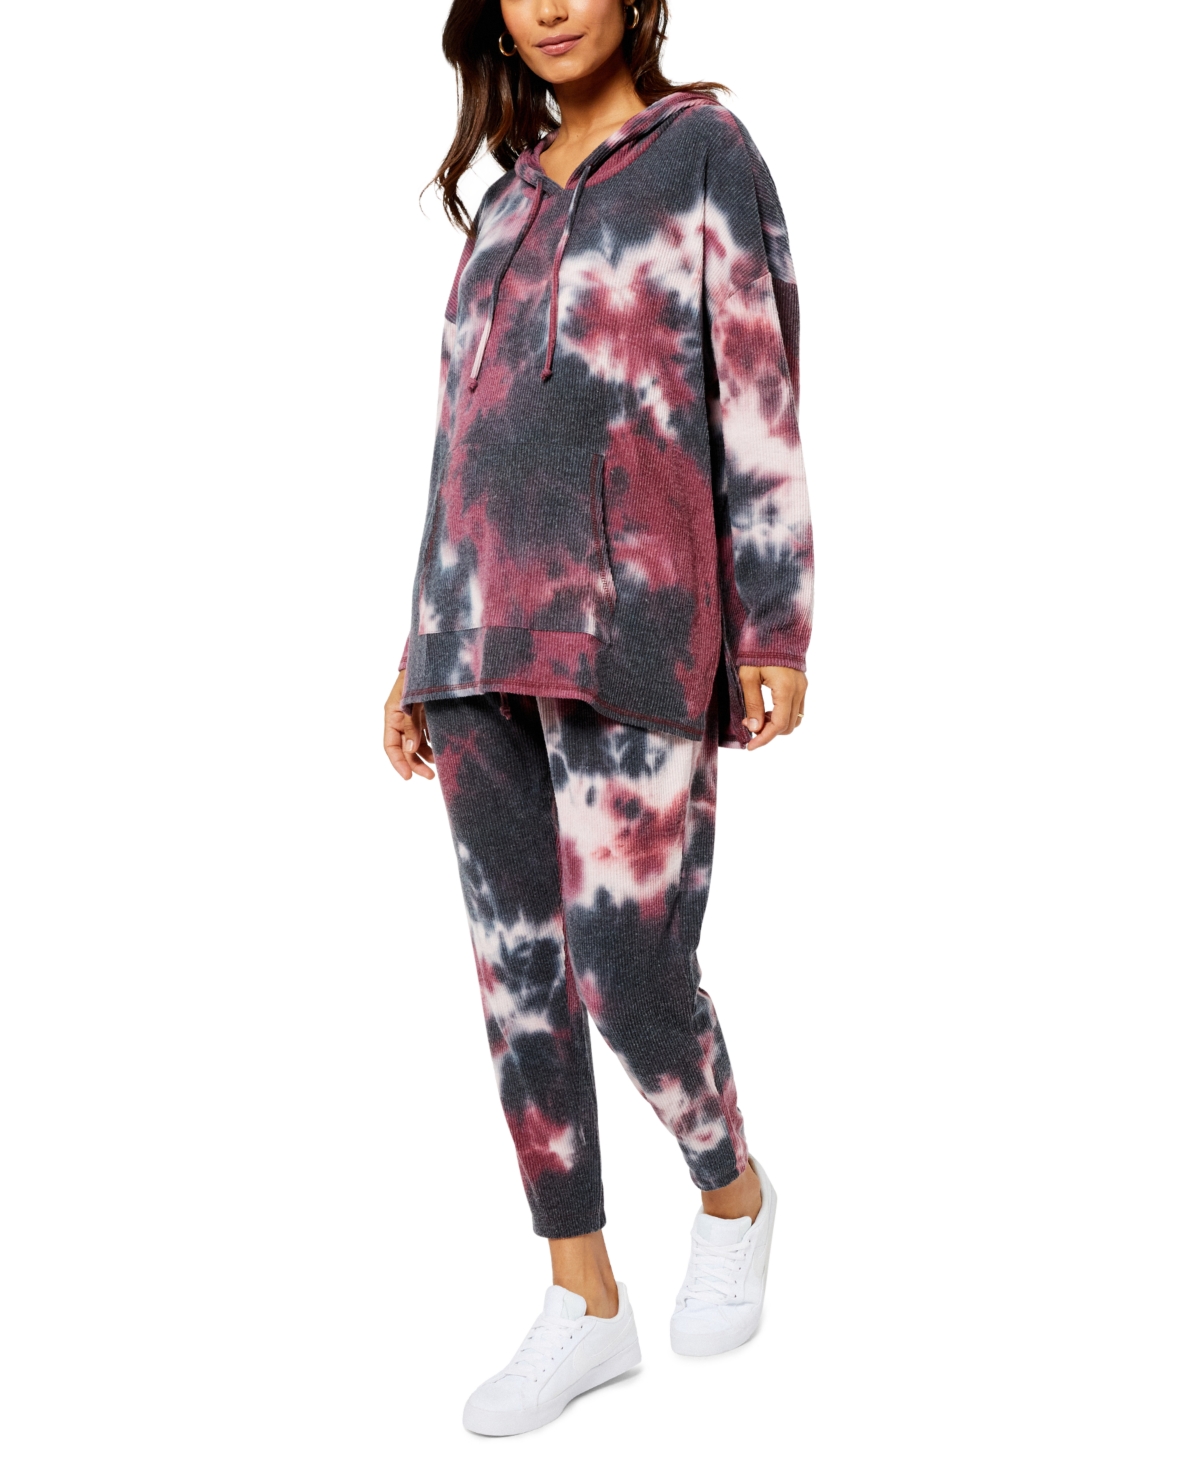  Chaser Tie-Dyed Maternity Hoodie